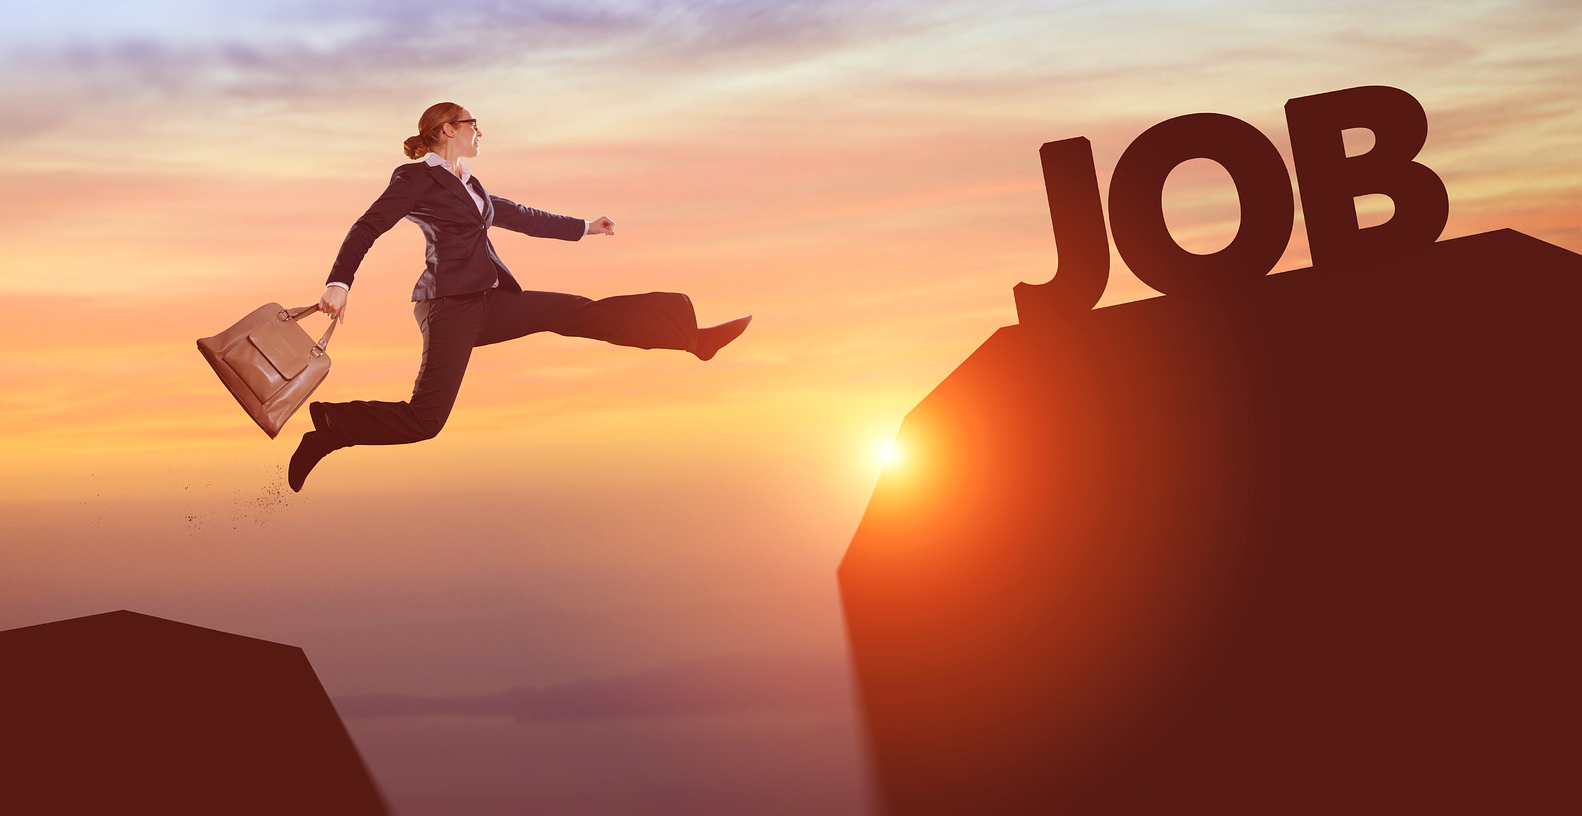 Business woman jumping from one rock to another labeled "Job."